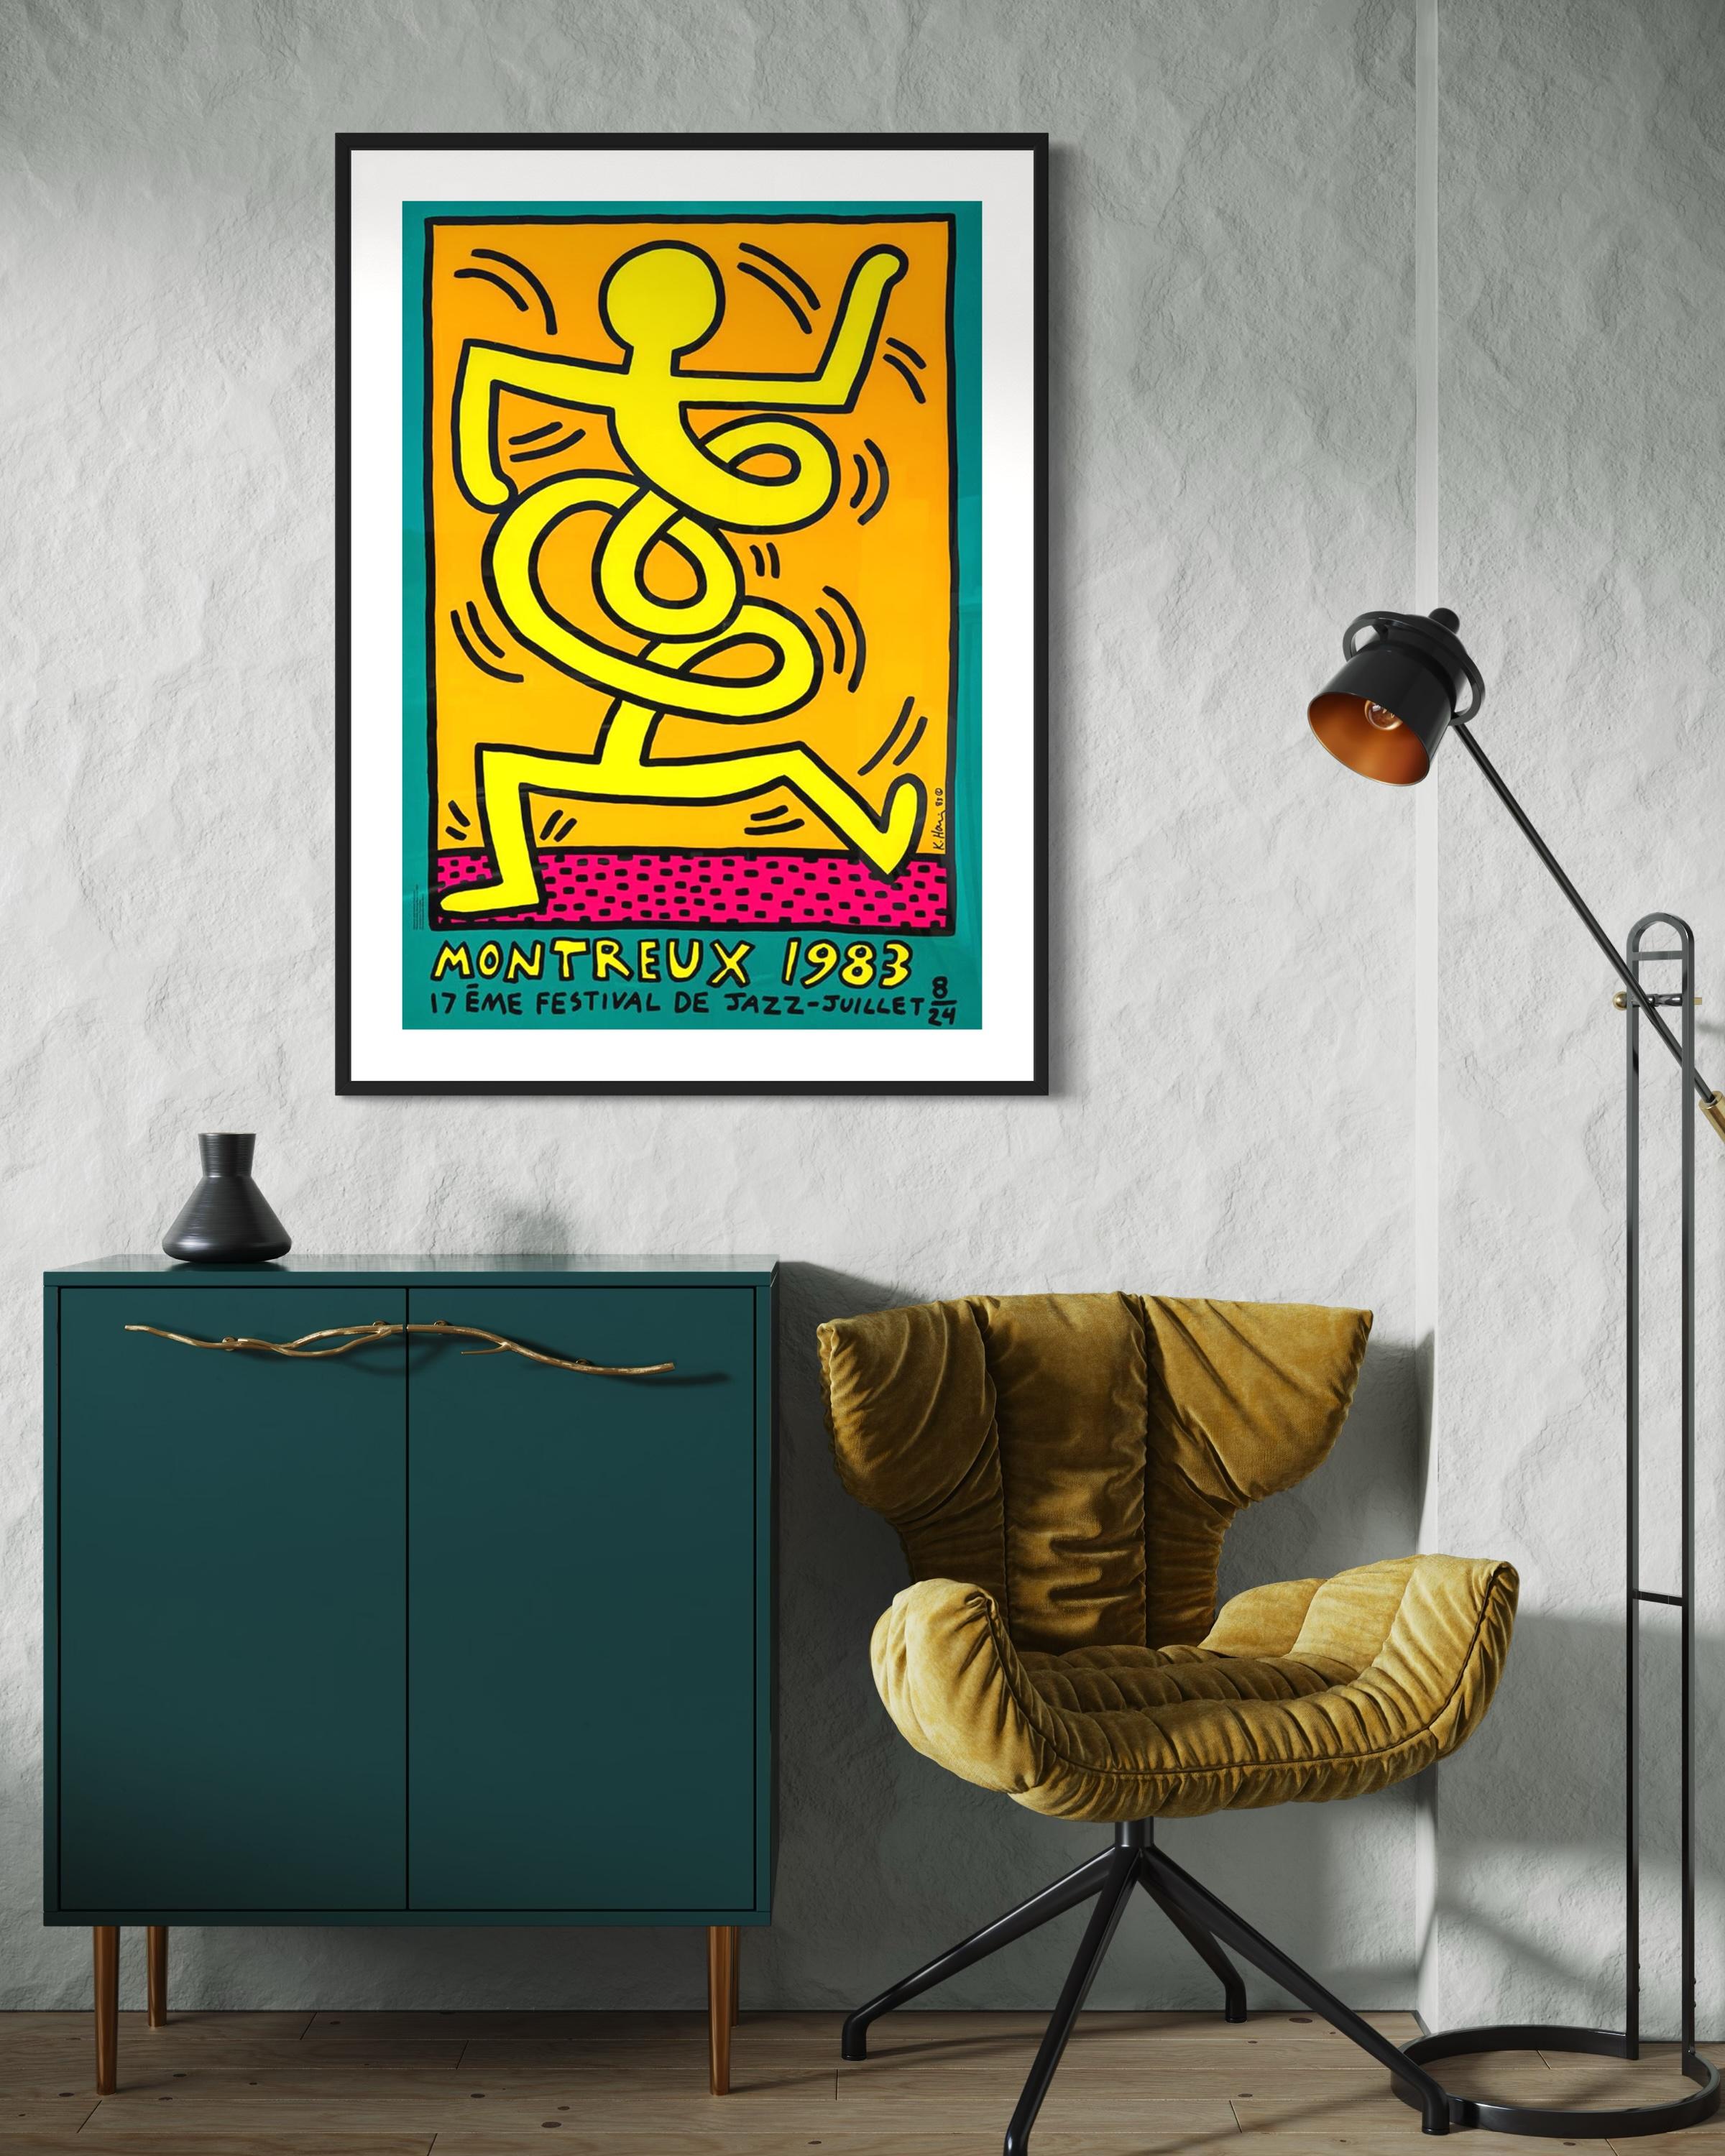 Montreux Jazz Festival 1983 (Green) - Print by Keith Haring